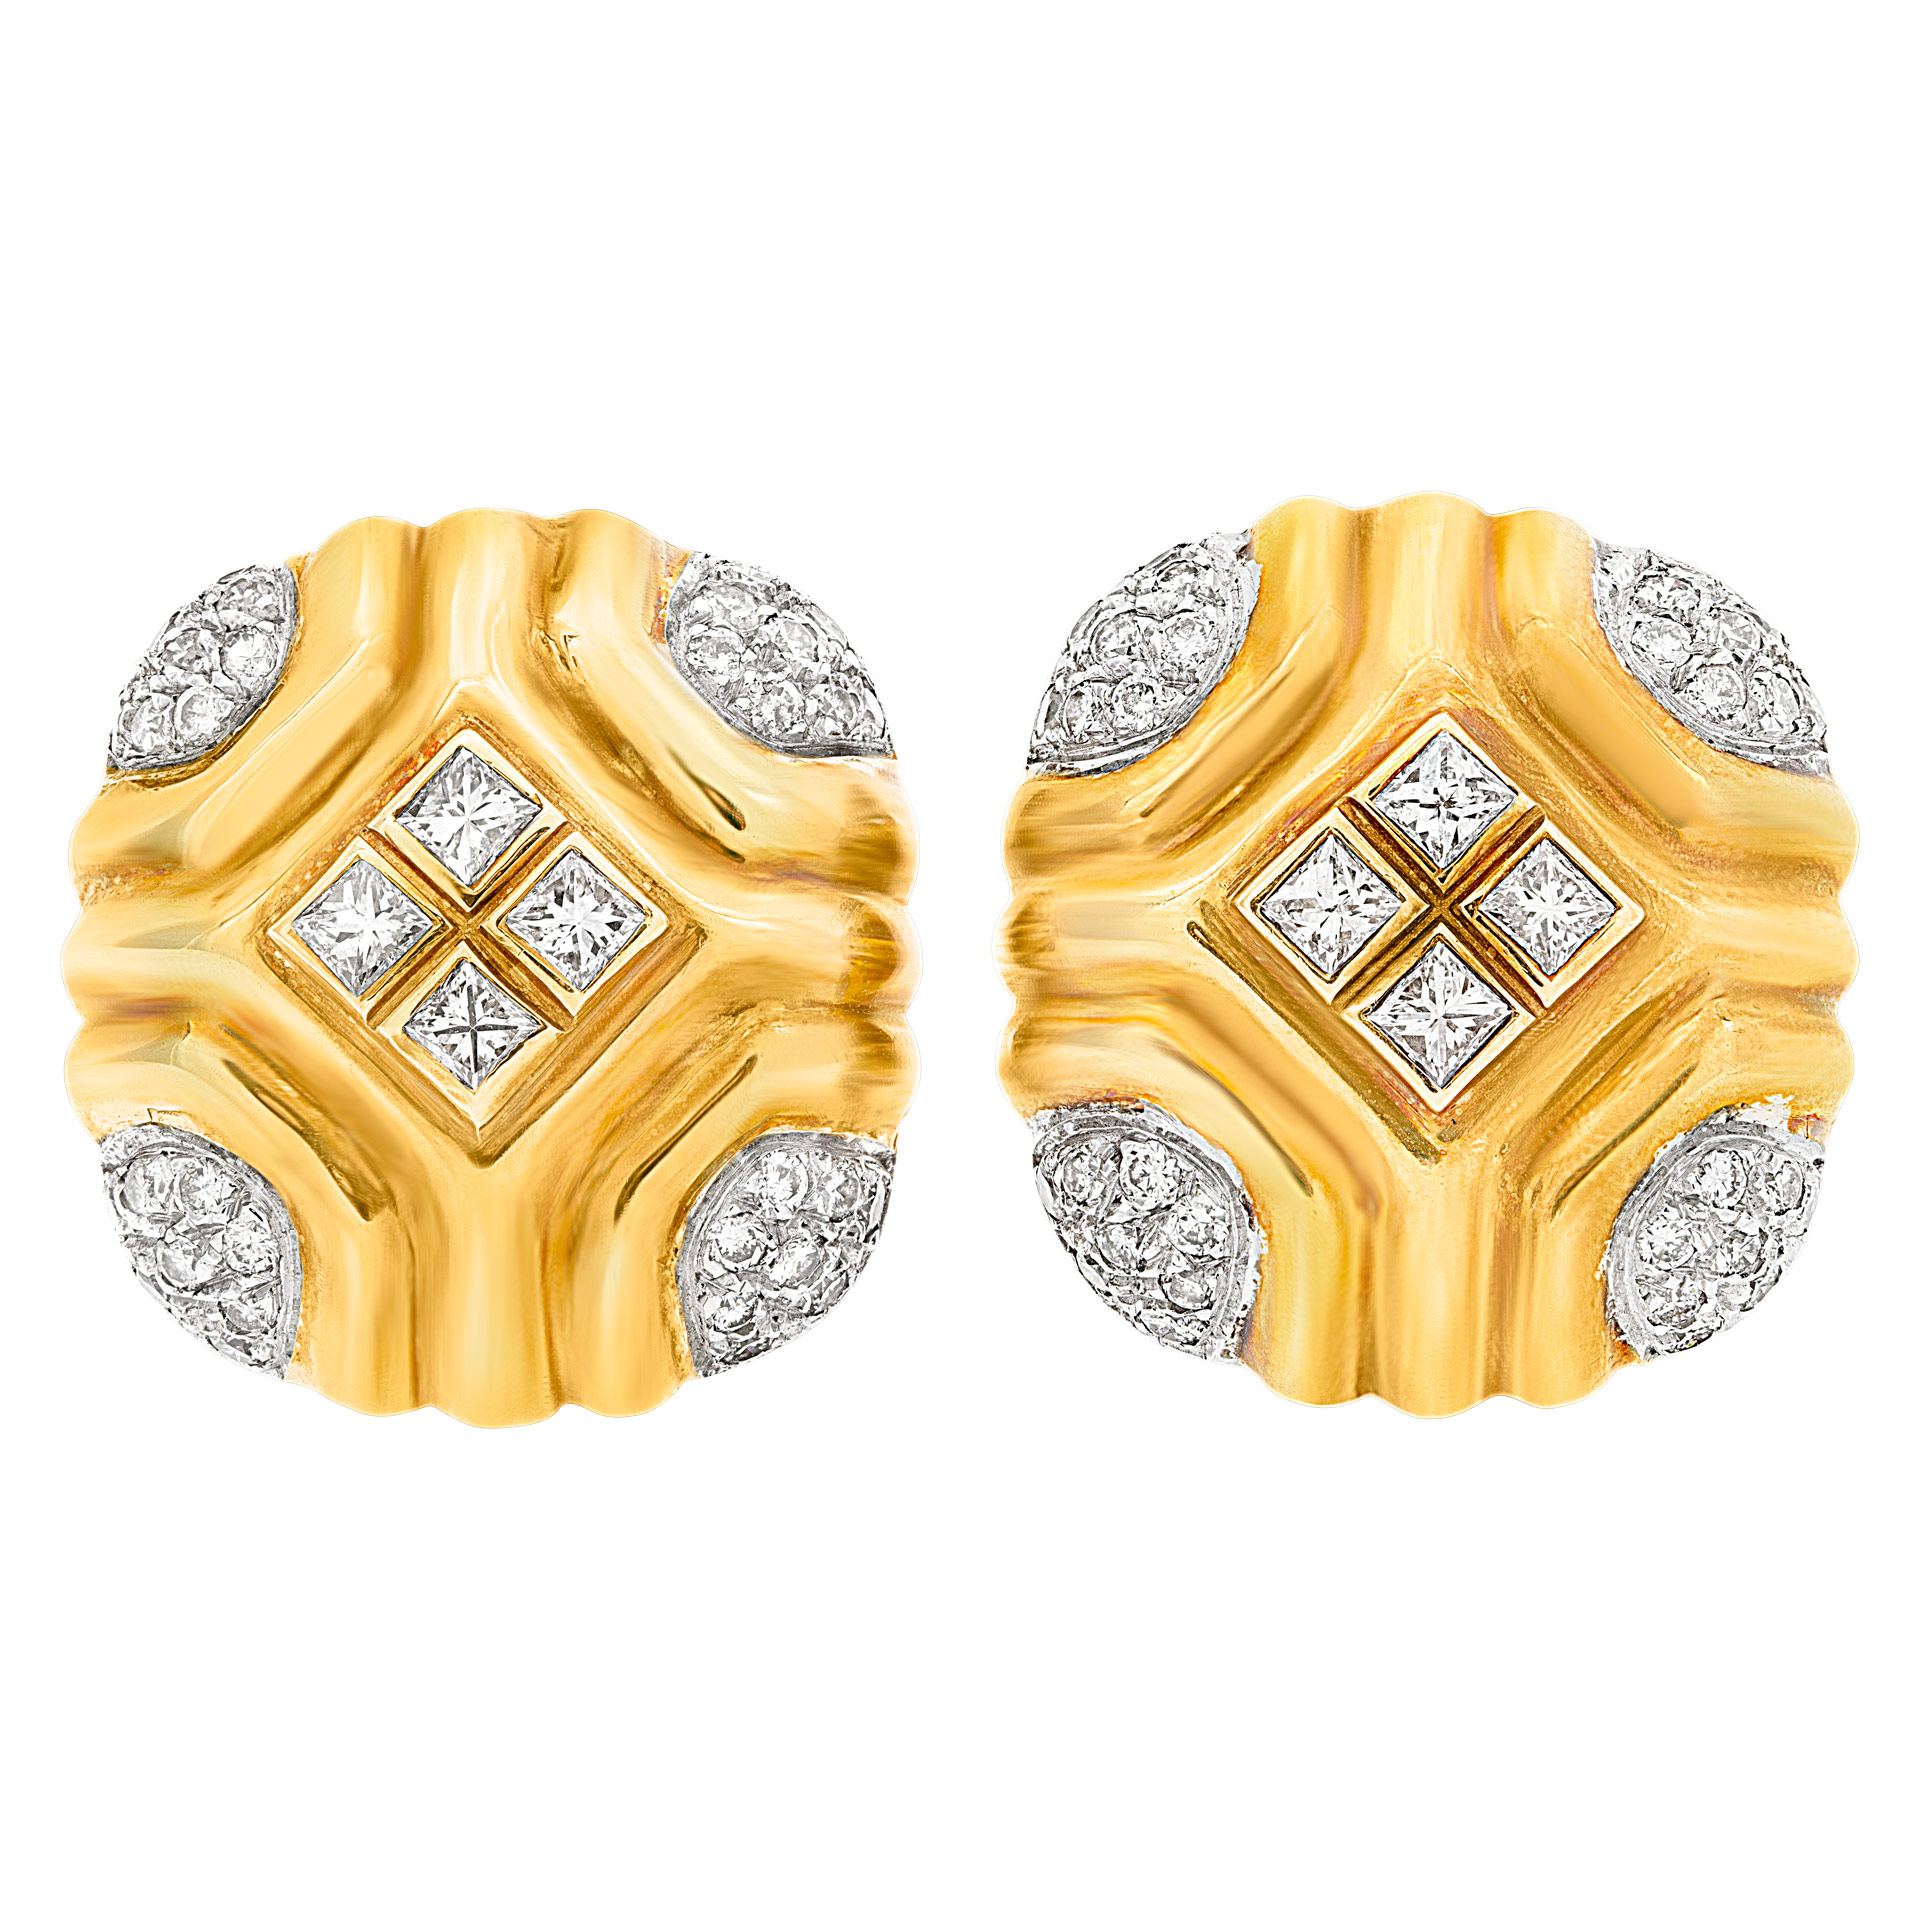 Elegant square button diamond earrings with approximately 2 carats in round and princess cut diamonds image 1